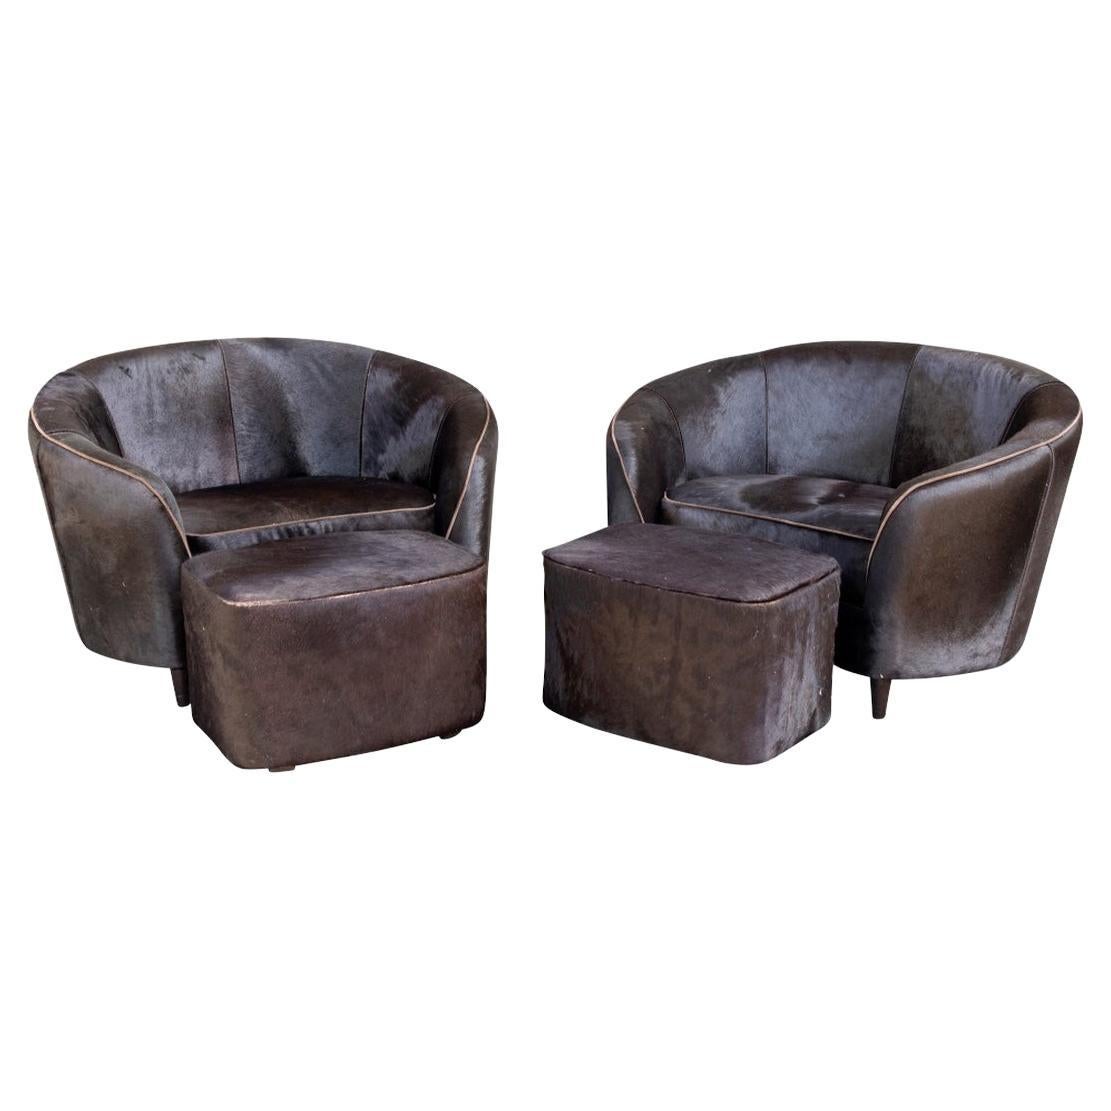 Pair of Hide Upholstered Club Chairs and Ottomans by Stone International